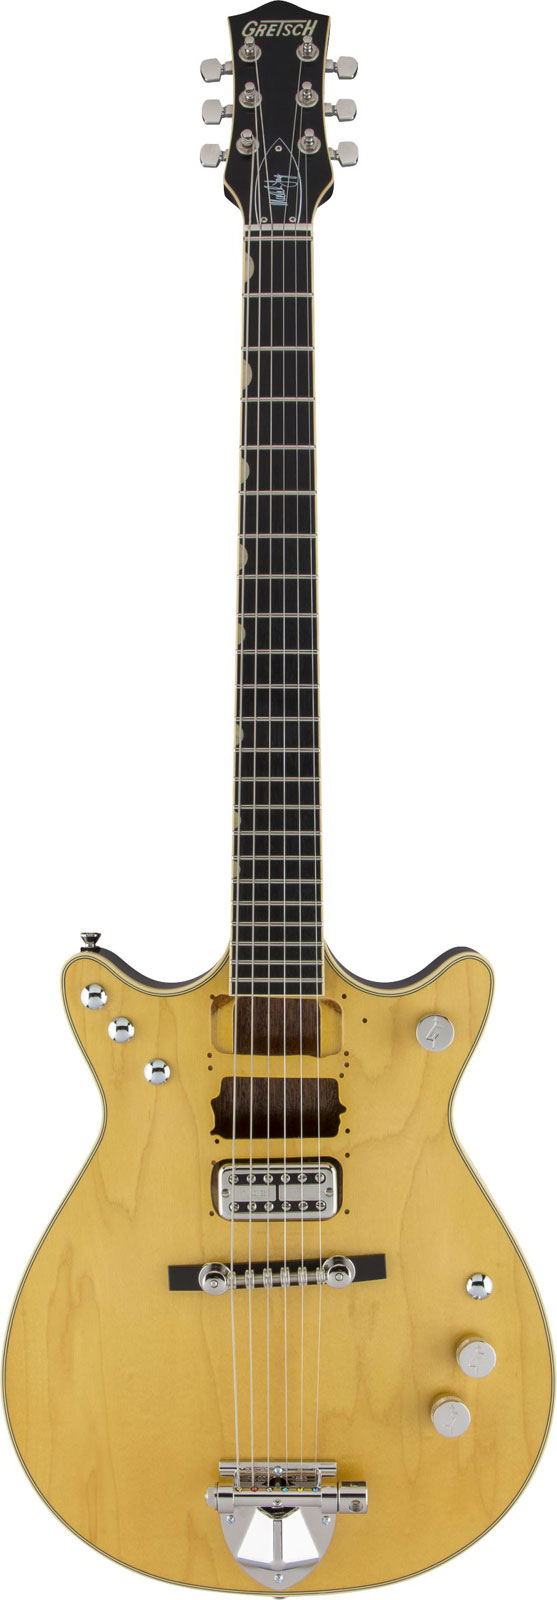 GRETSCH GUITARS G6131-MY MALCOLM YOUNG SIGNATURE JET EBO, NATURAL